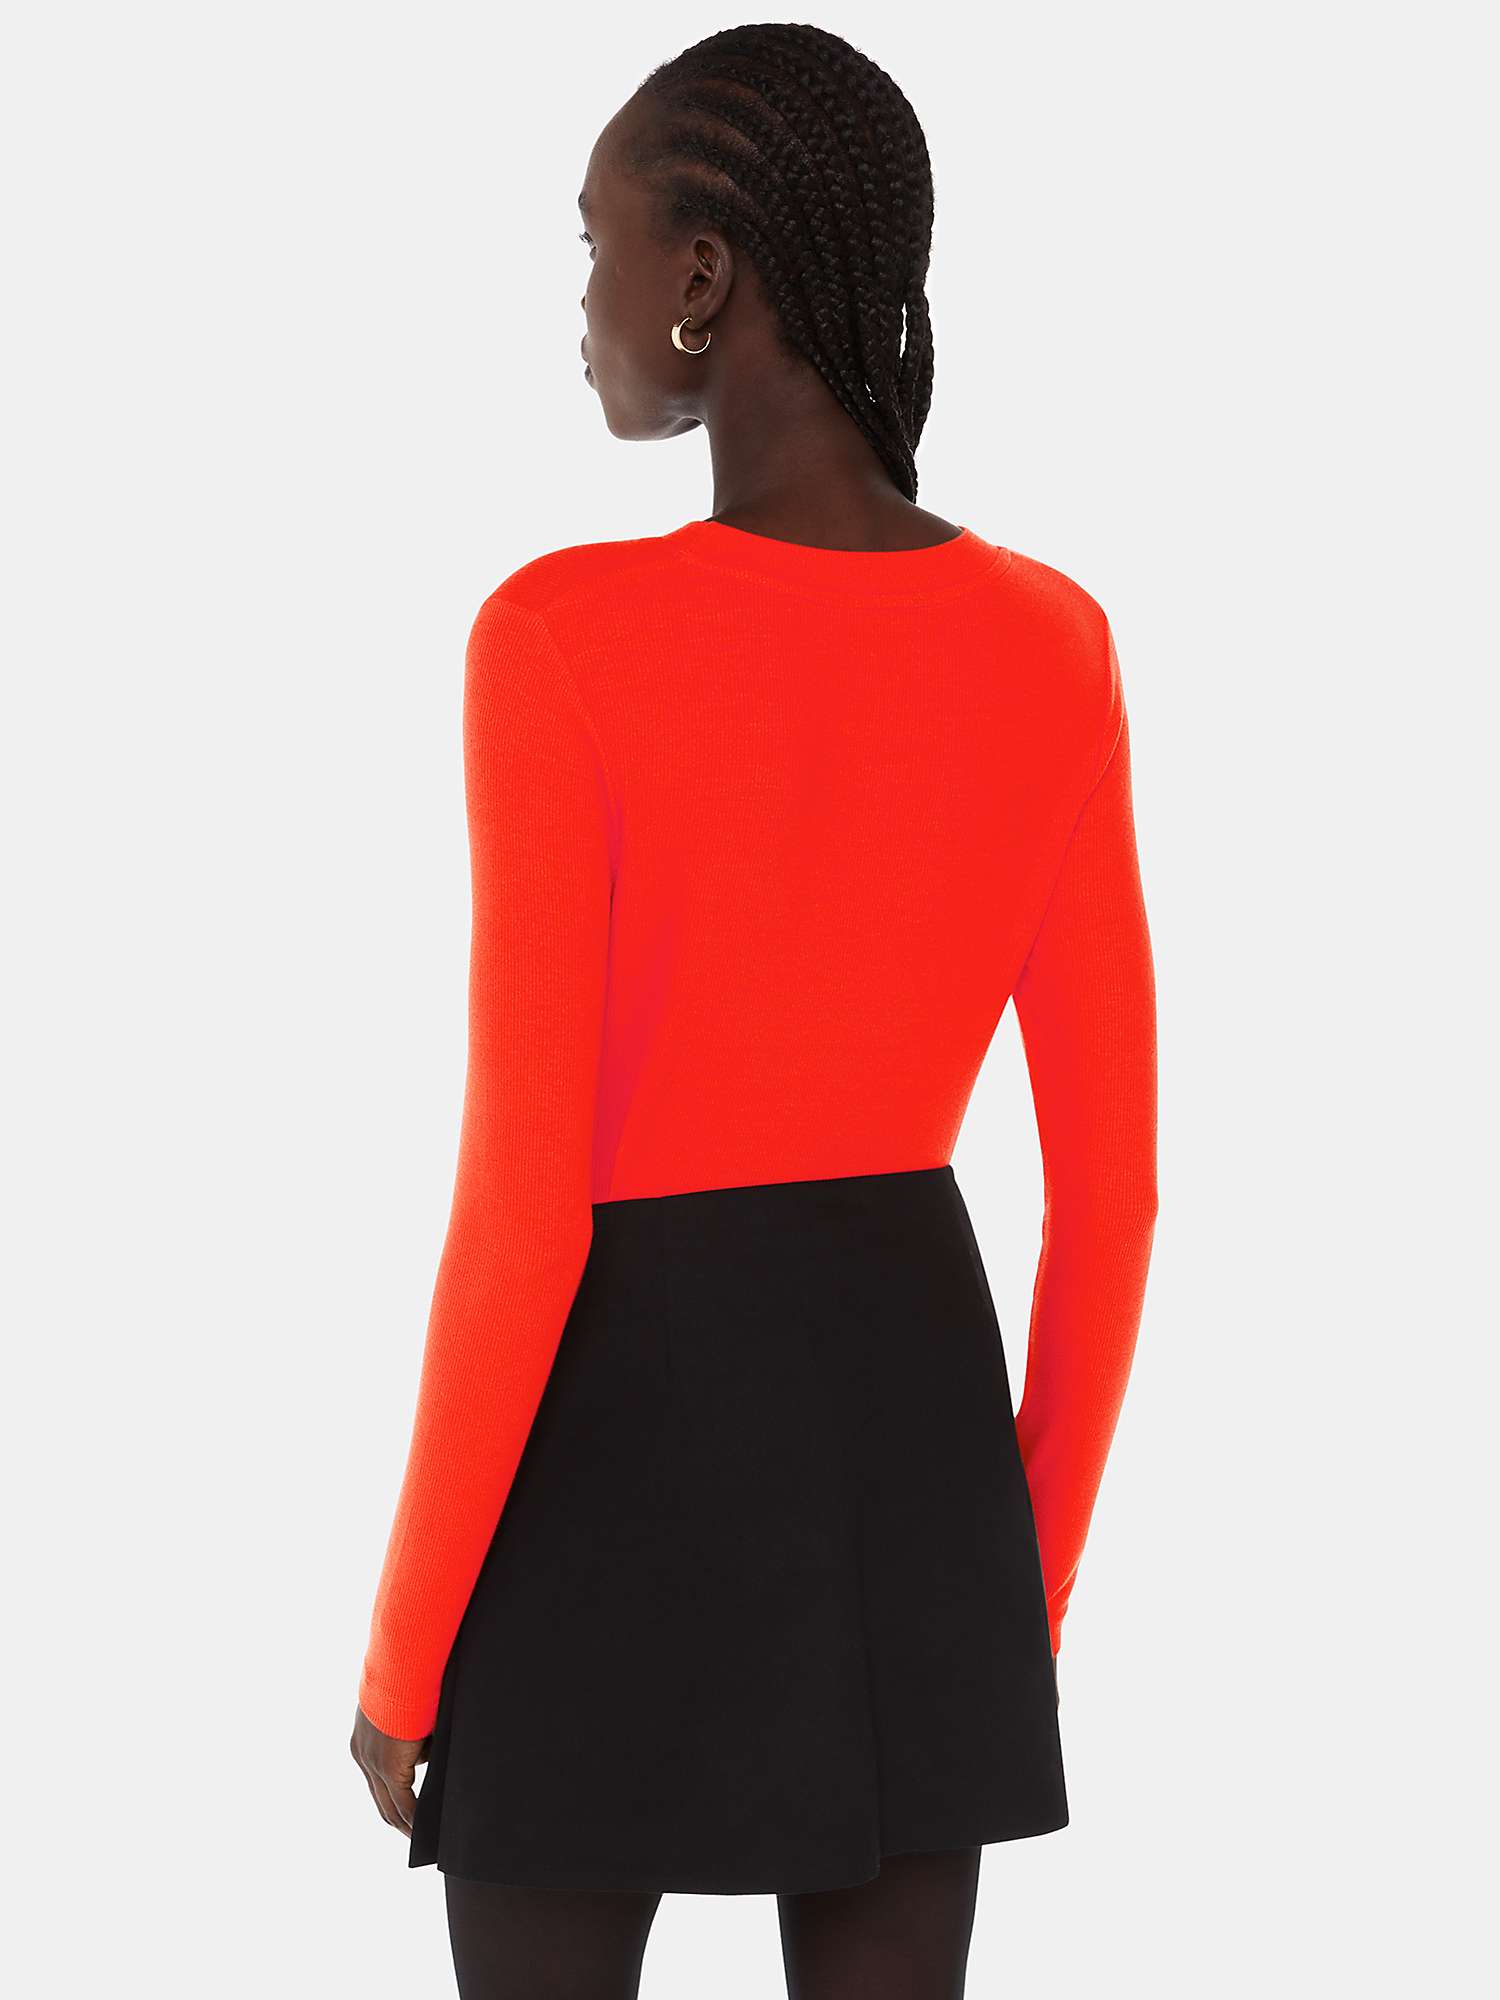 Buy Whistles Essential Ribbed Crew Neck Top Online at johnlewis.com